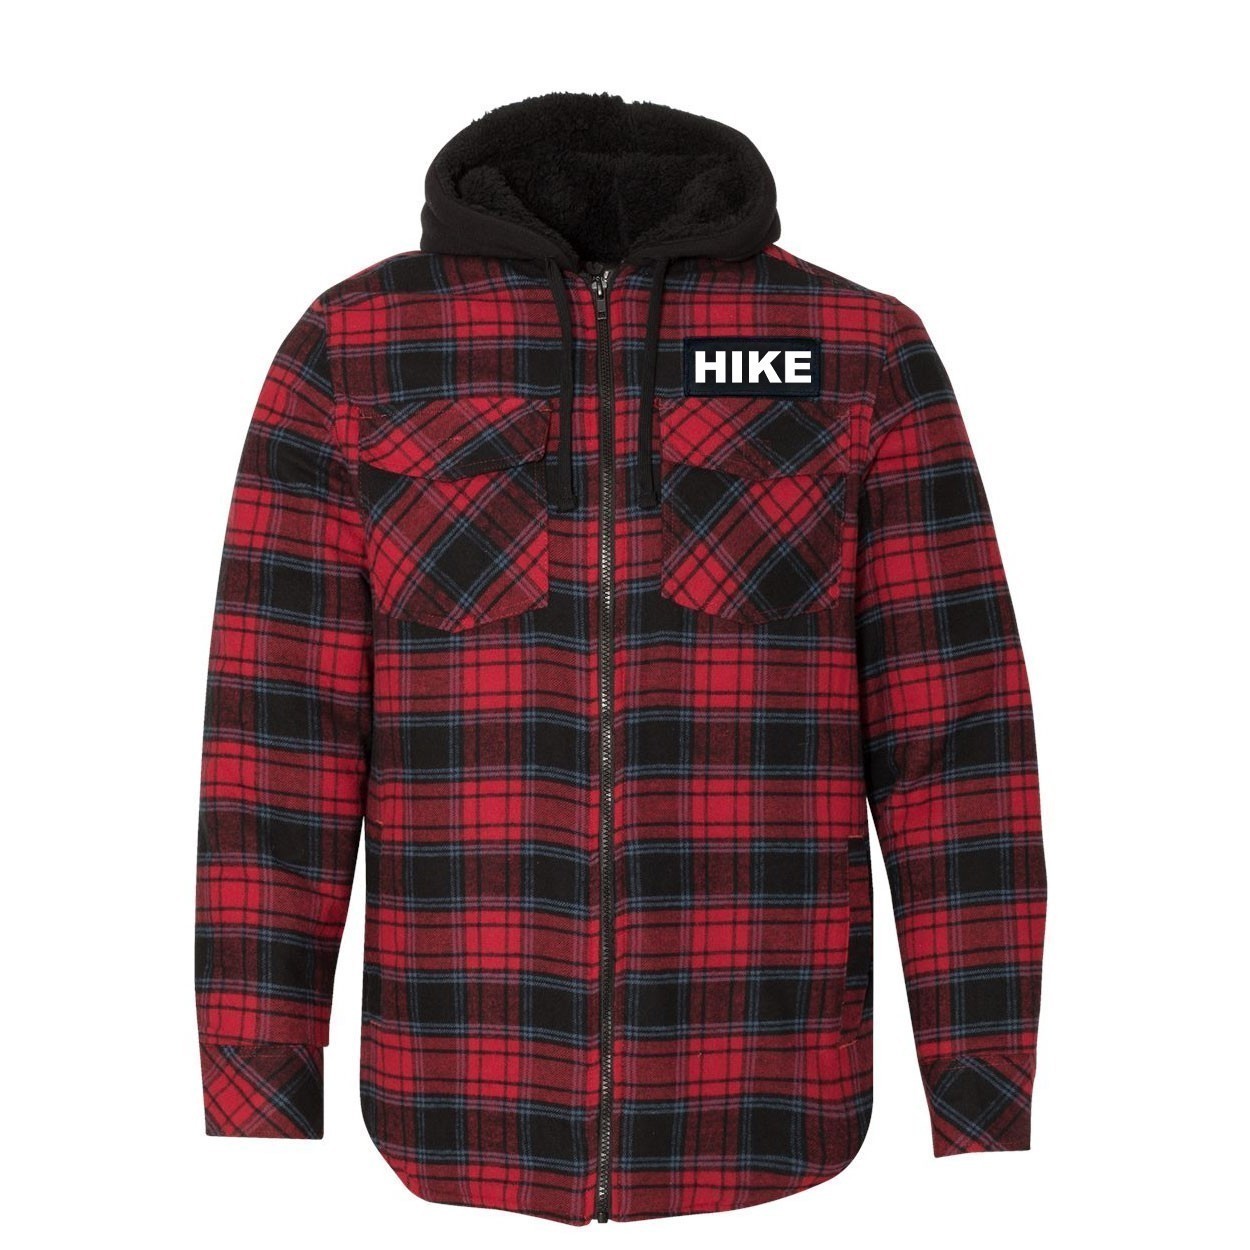 Hike Brand Logo Classic Unisex Full Zip Woven Patch Hooded Flannel Jacket Red/Black Buffalo